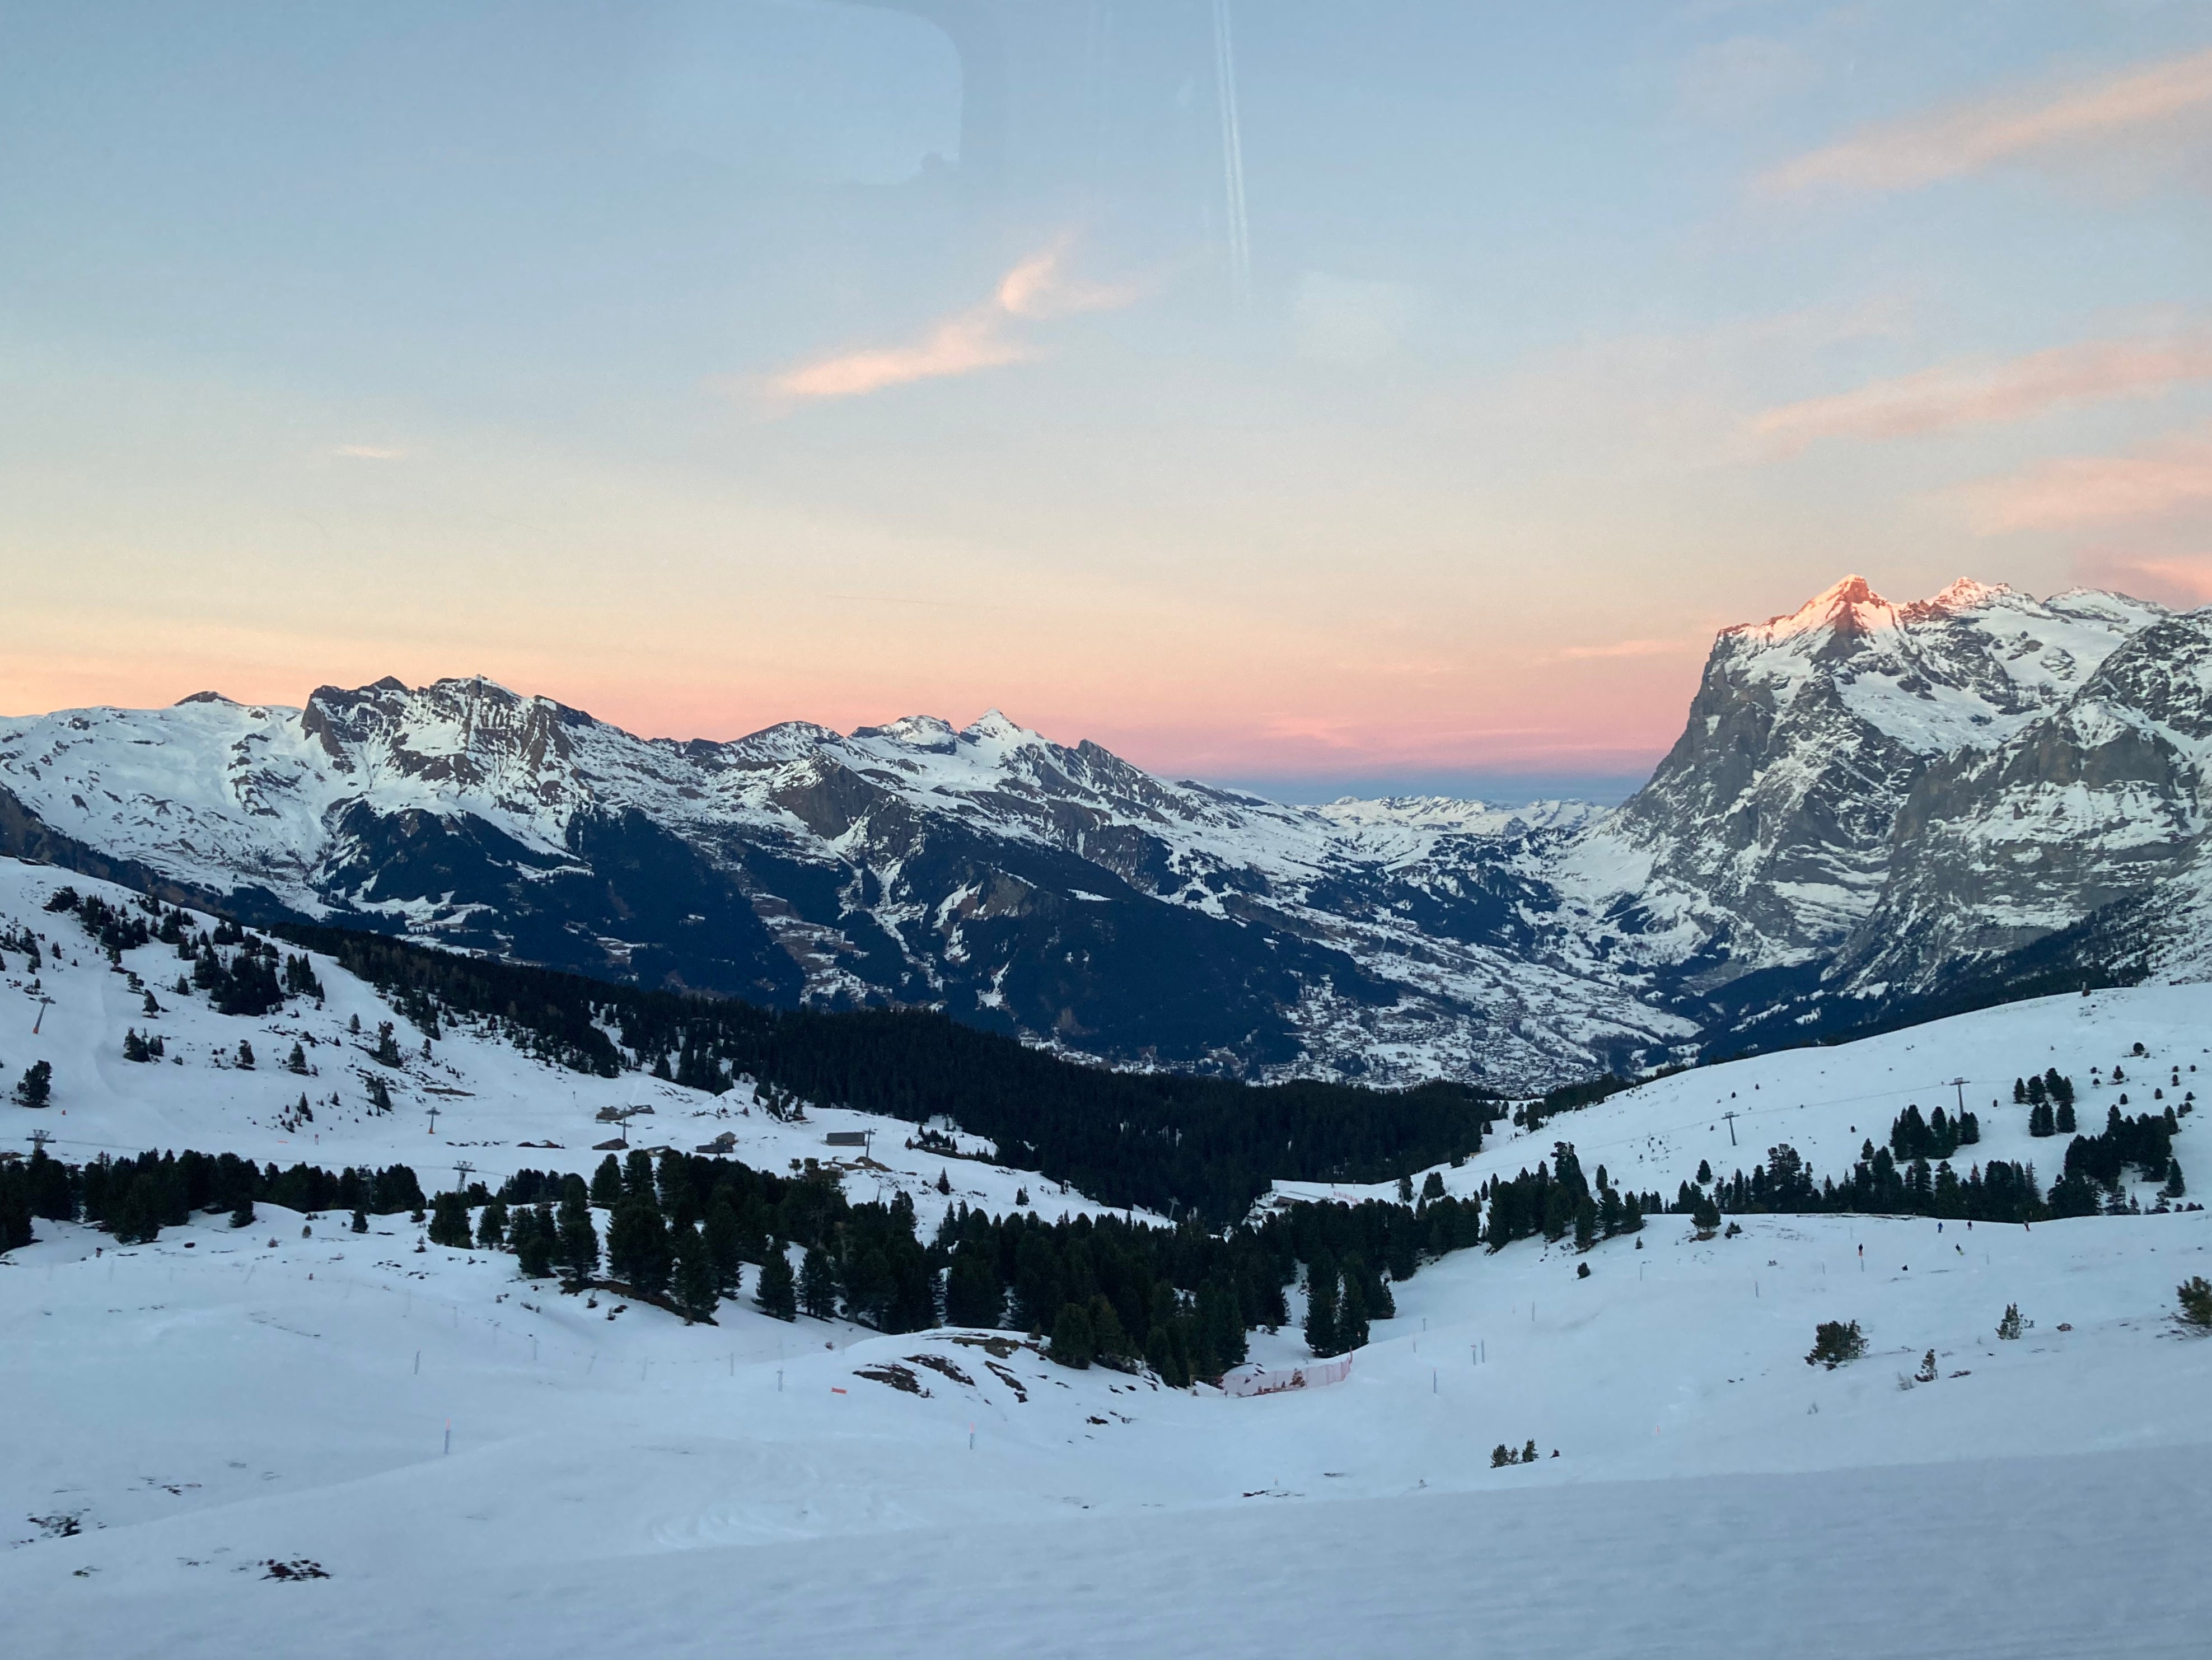 Gondola with a view: The pristine peaks of the Jungfrau Region